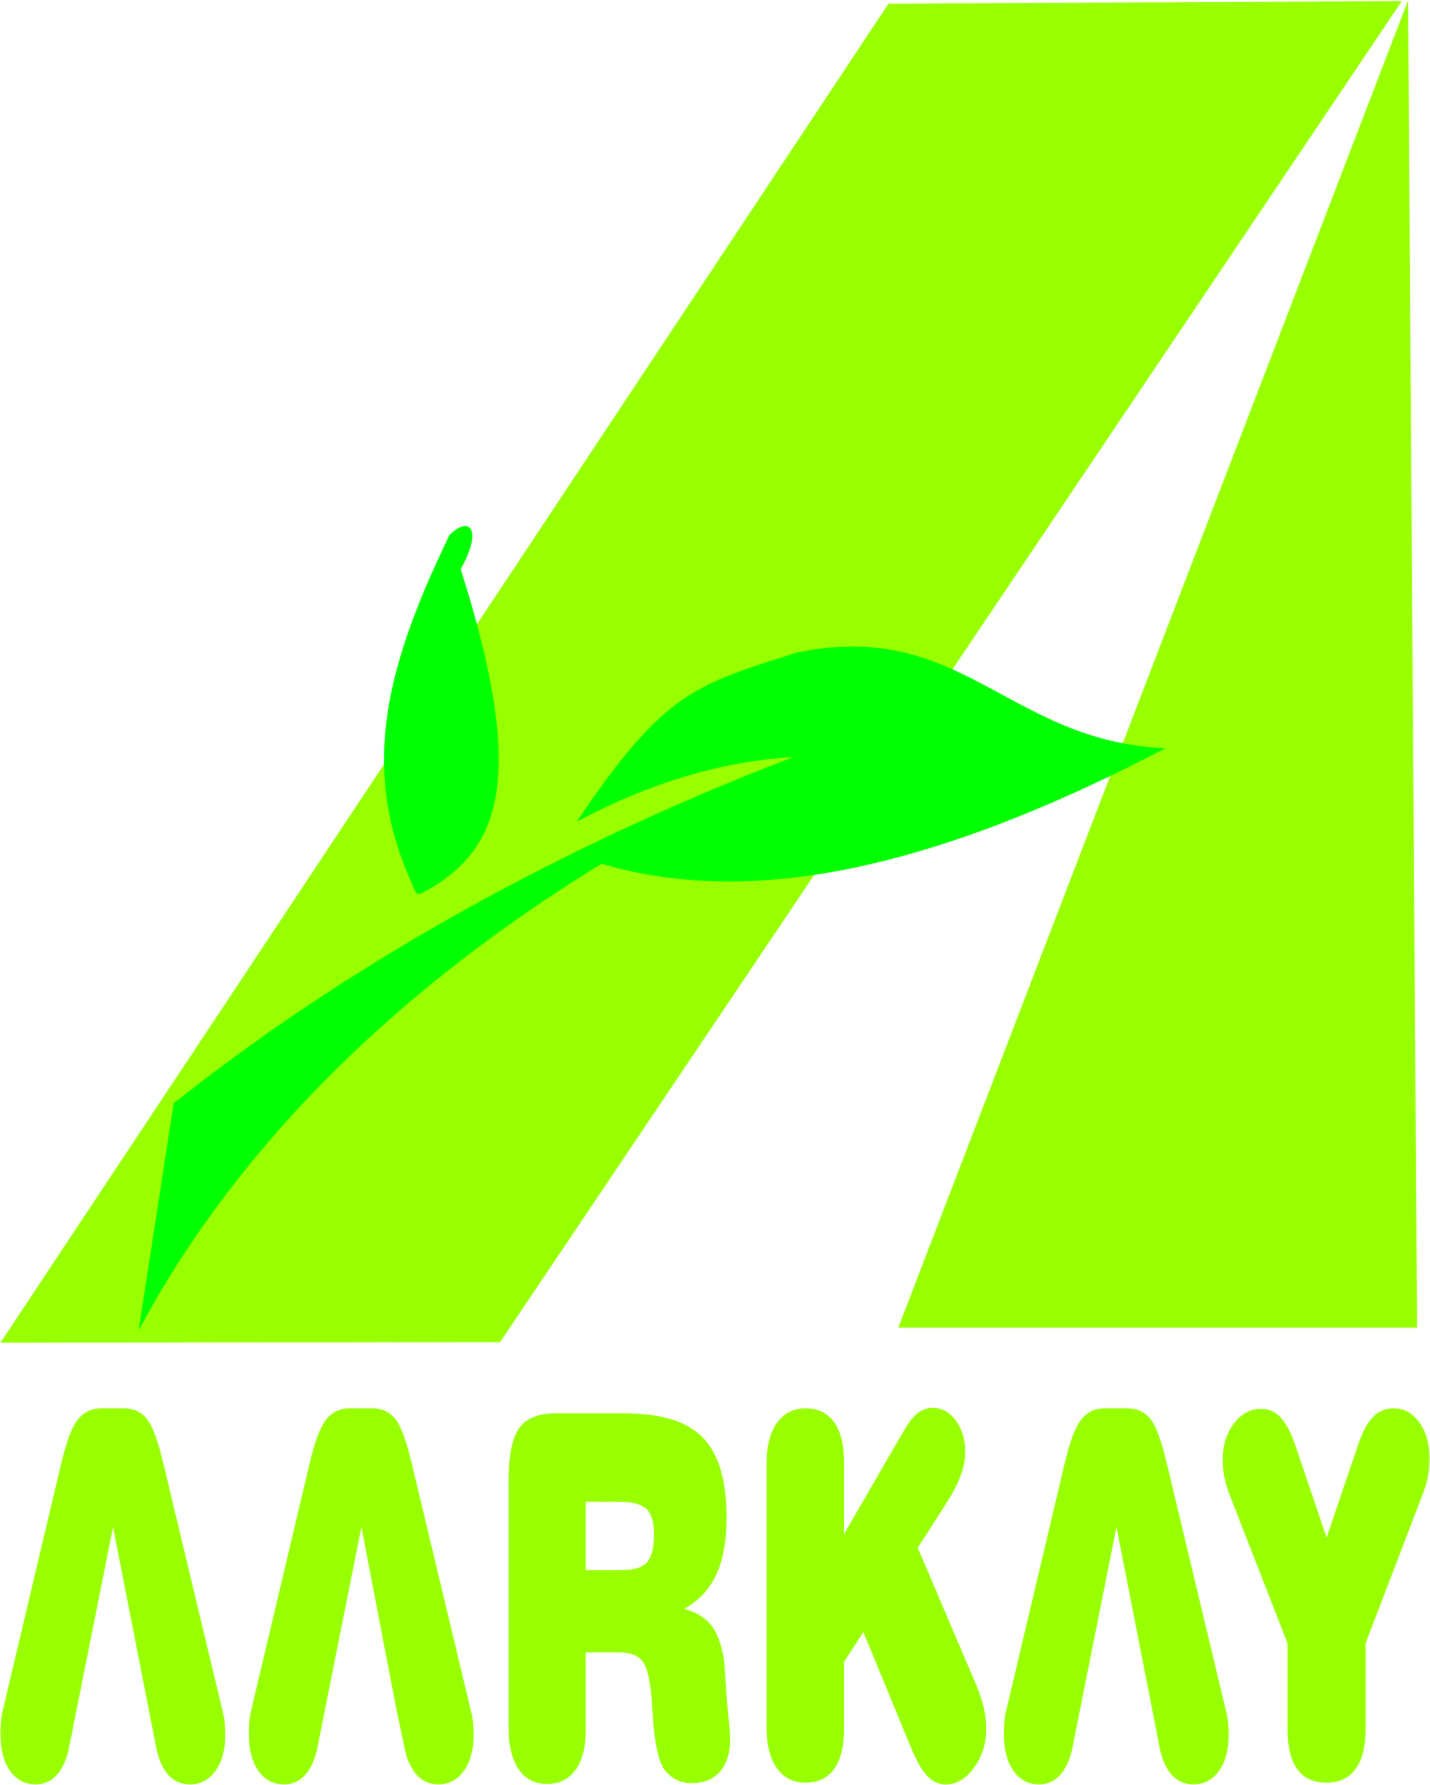 Aarkay Food Products Limited